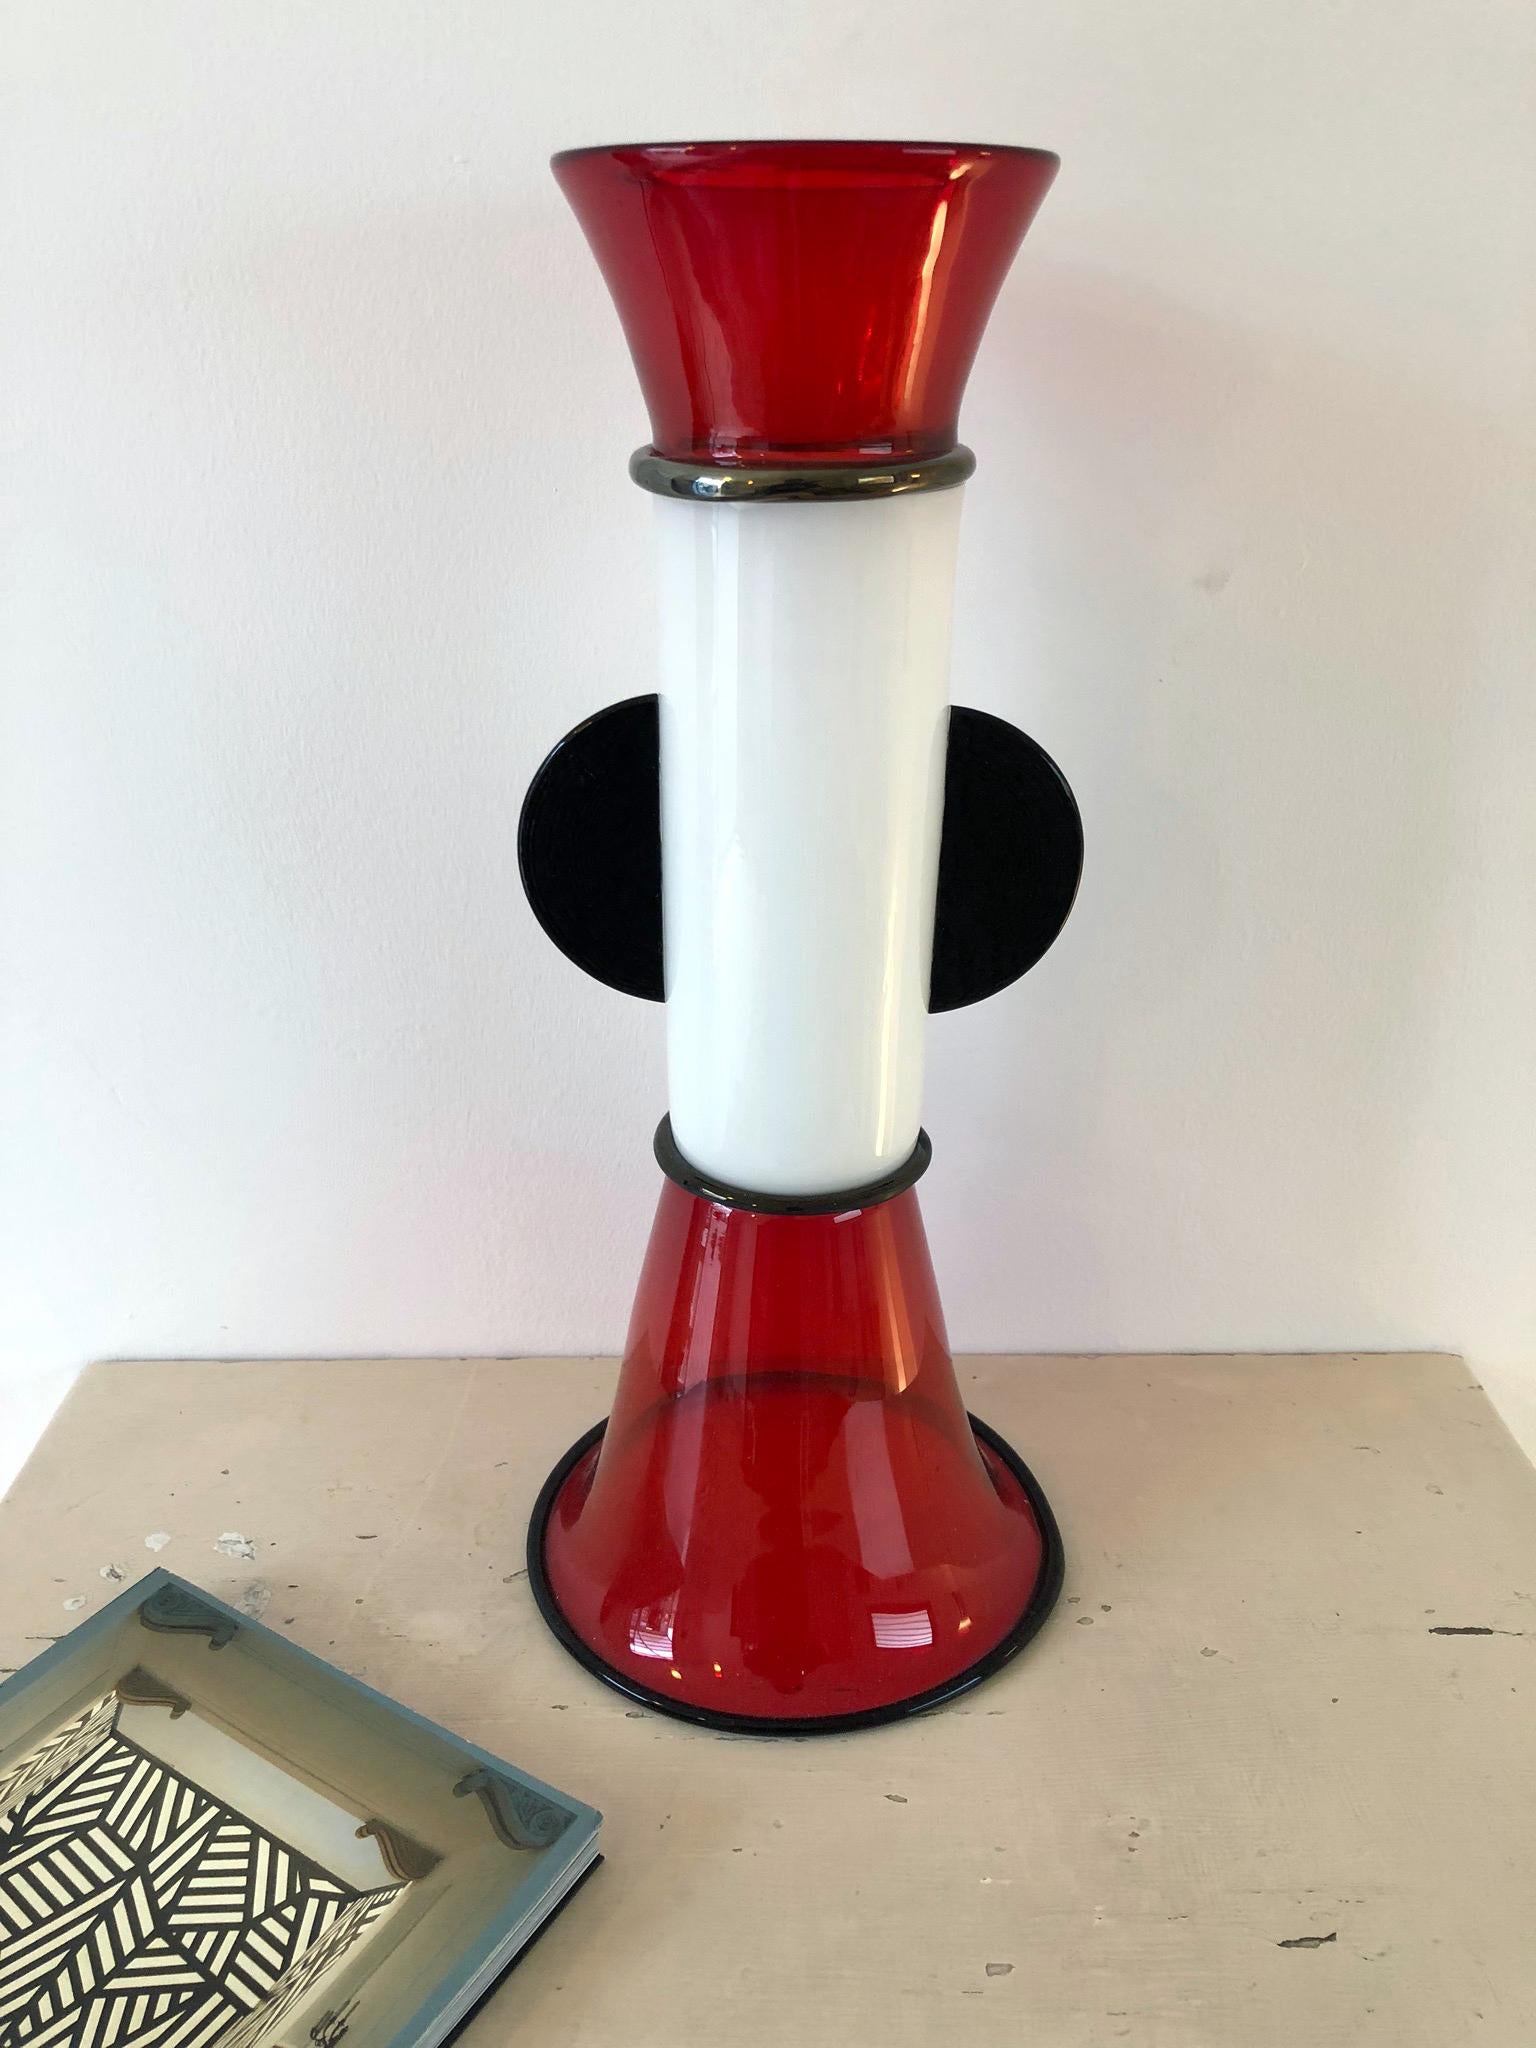 From very rare '1960s' Collection of 8 pieces, 'Bidogale' vase designed by Sergio Asti in 1985.
An iconic vase in red, black and white 'lattimo' glass (milky glass) realised with 'incalmo' technique.

It's part of the full collection titled